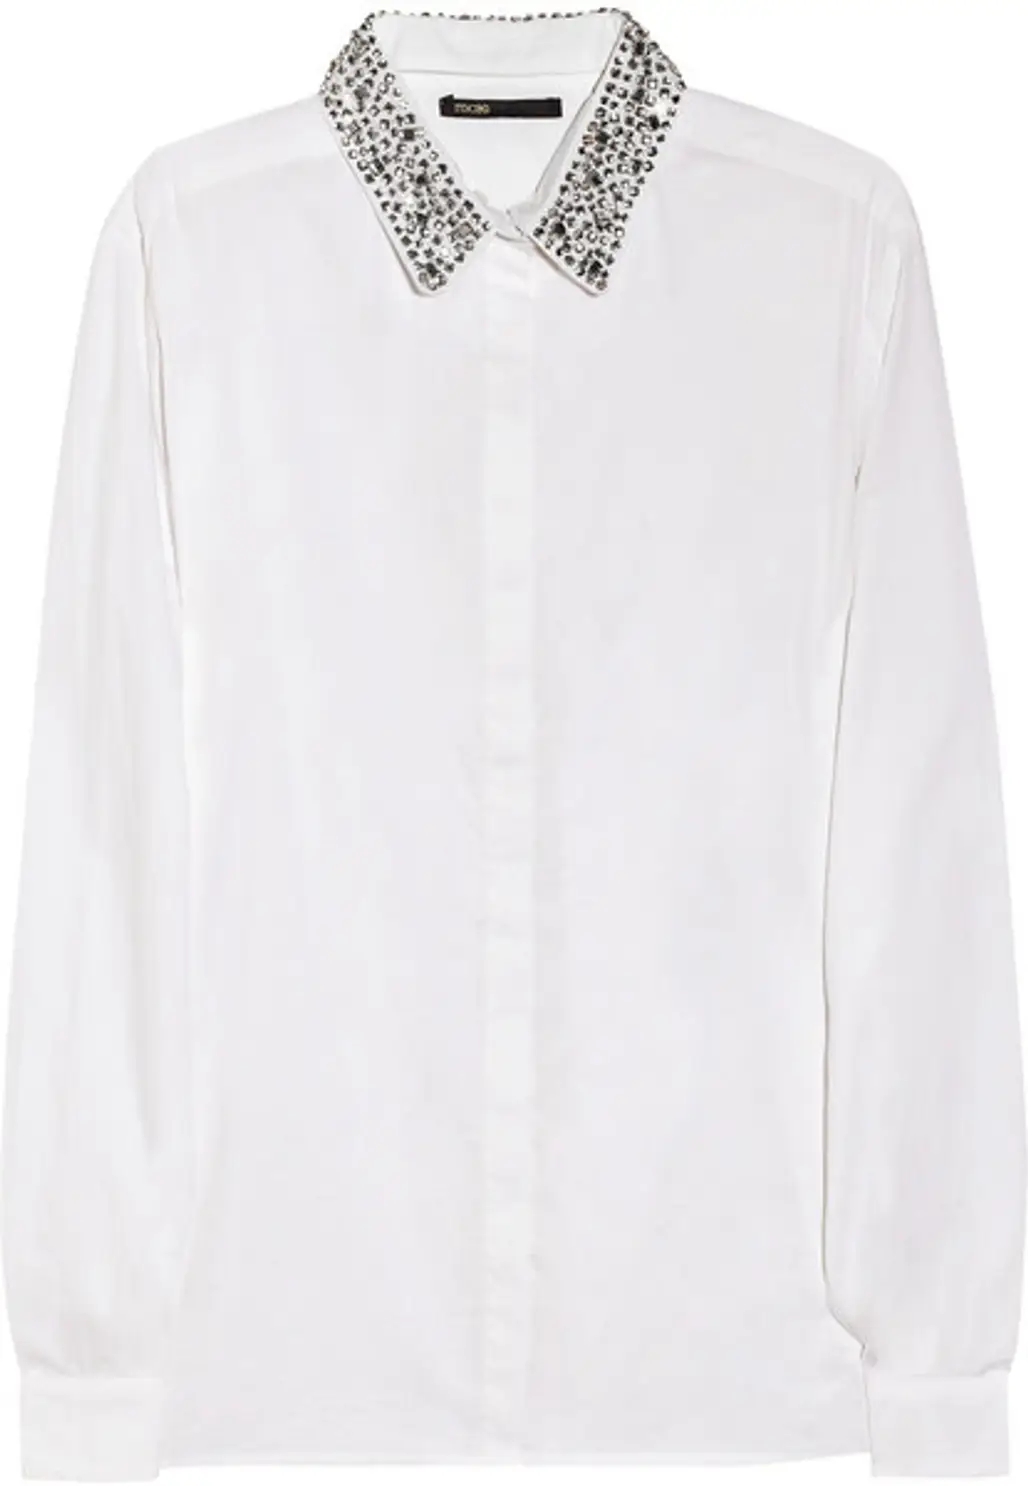 Embellished Collar Button up Top